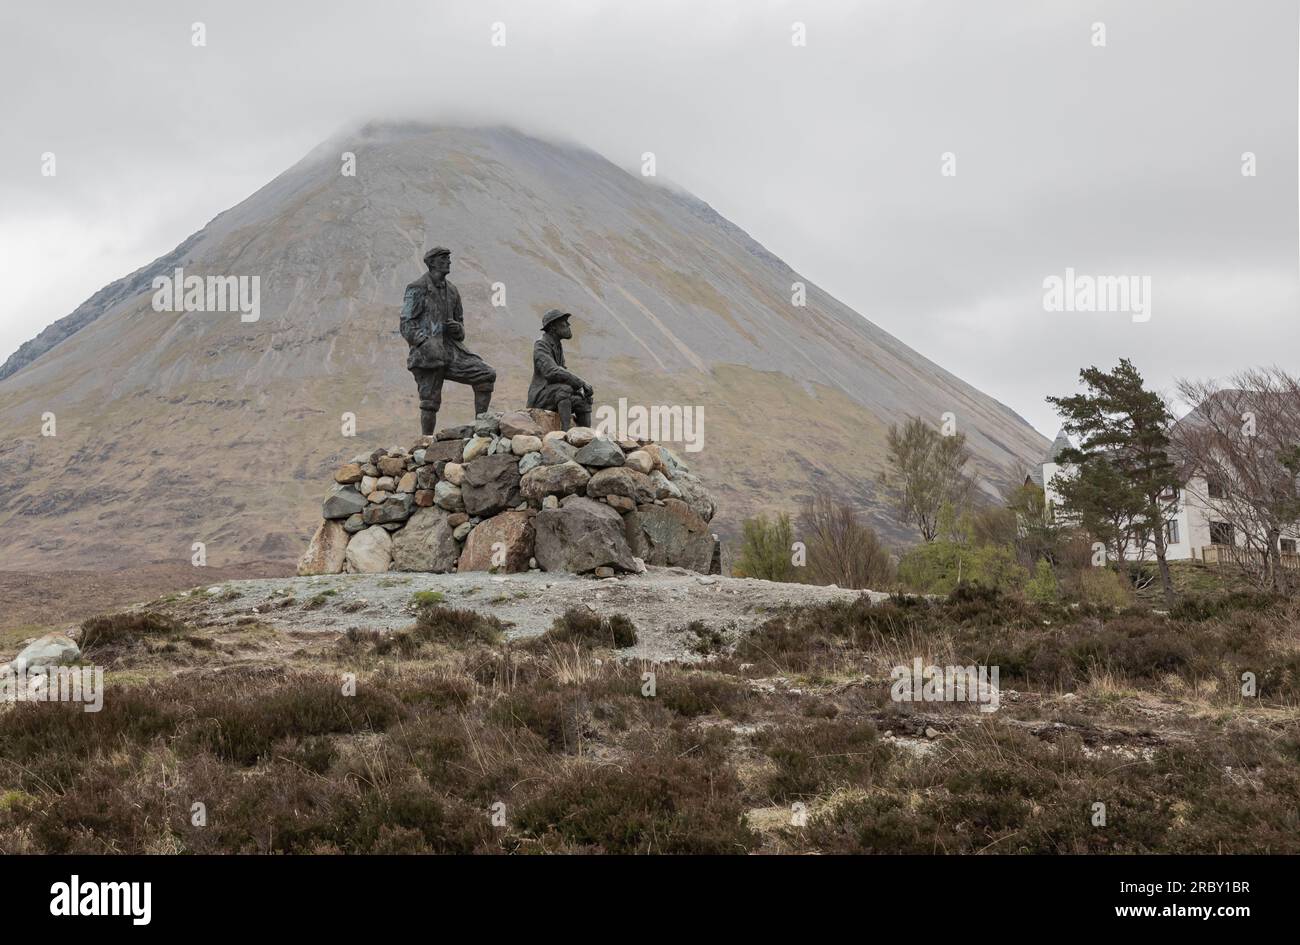 Two statues on a pile of stones in the Scottish highlands on a misty cold day Stock Photo